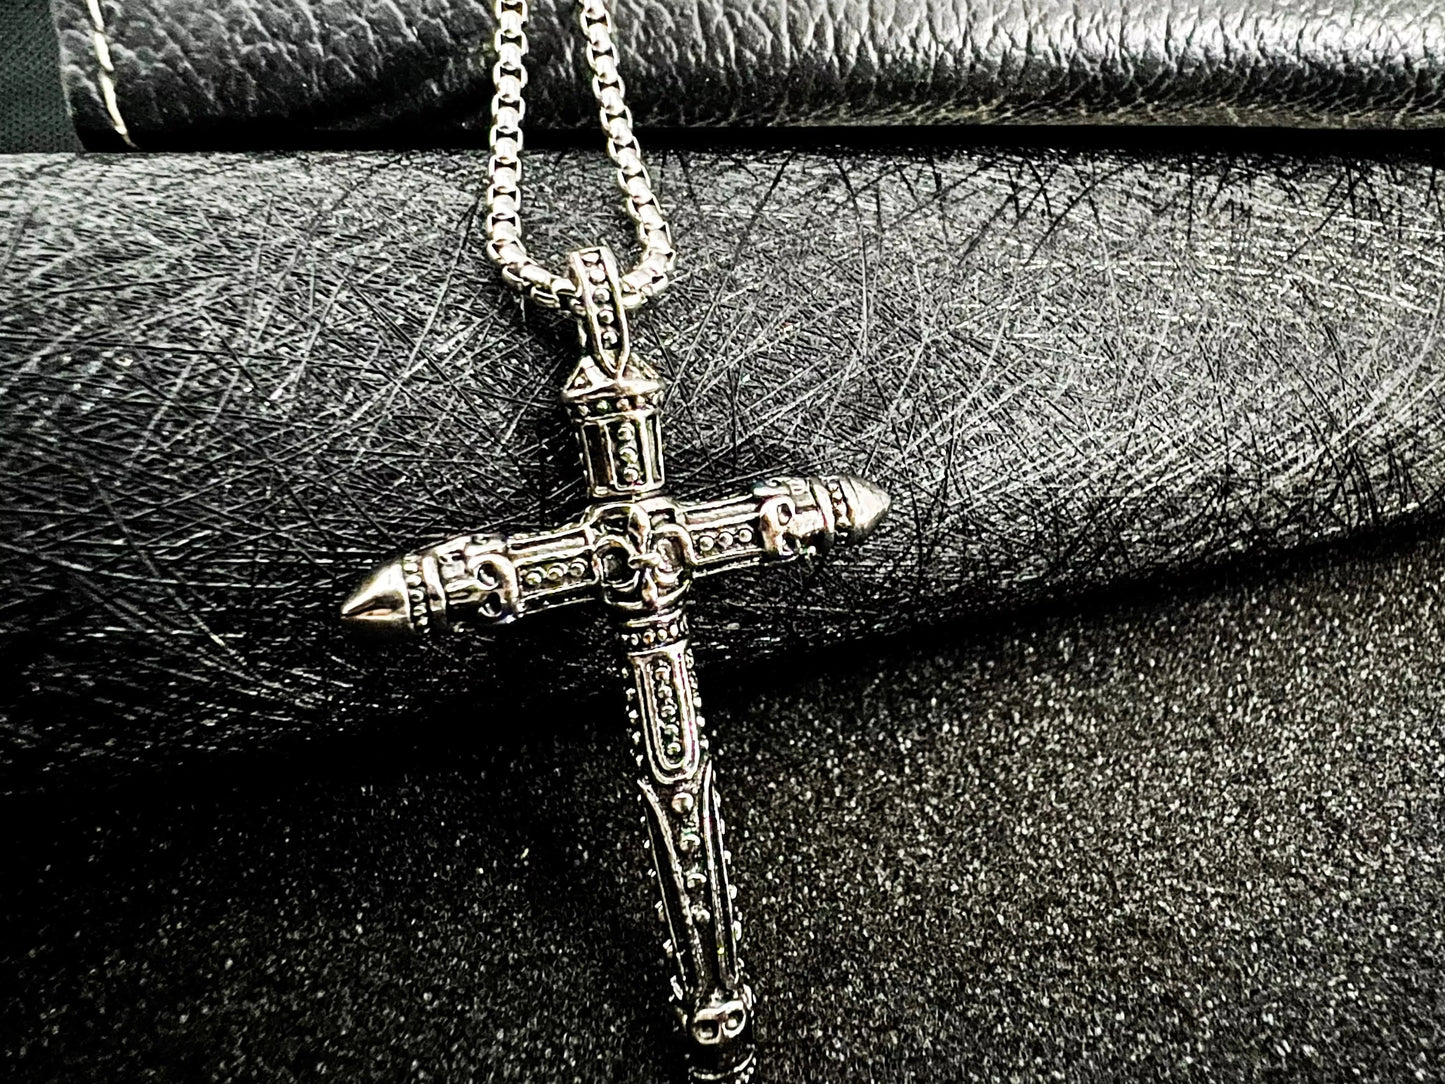 THE MEN THING Alloy Pattern Cross Pendant with Pure Stainless Steel 24inch Chain for Men, Milan trending Style - Round Box Chain & Pendant for Men & Boy